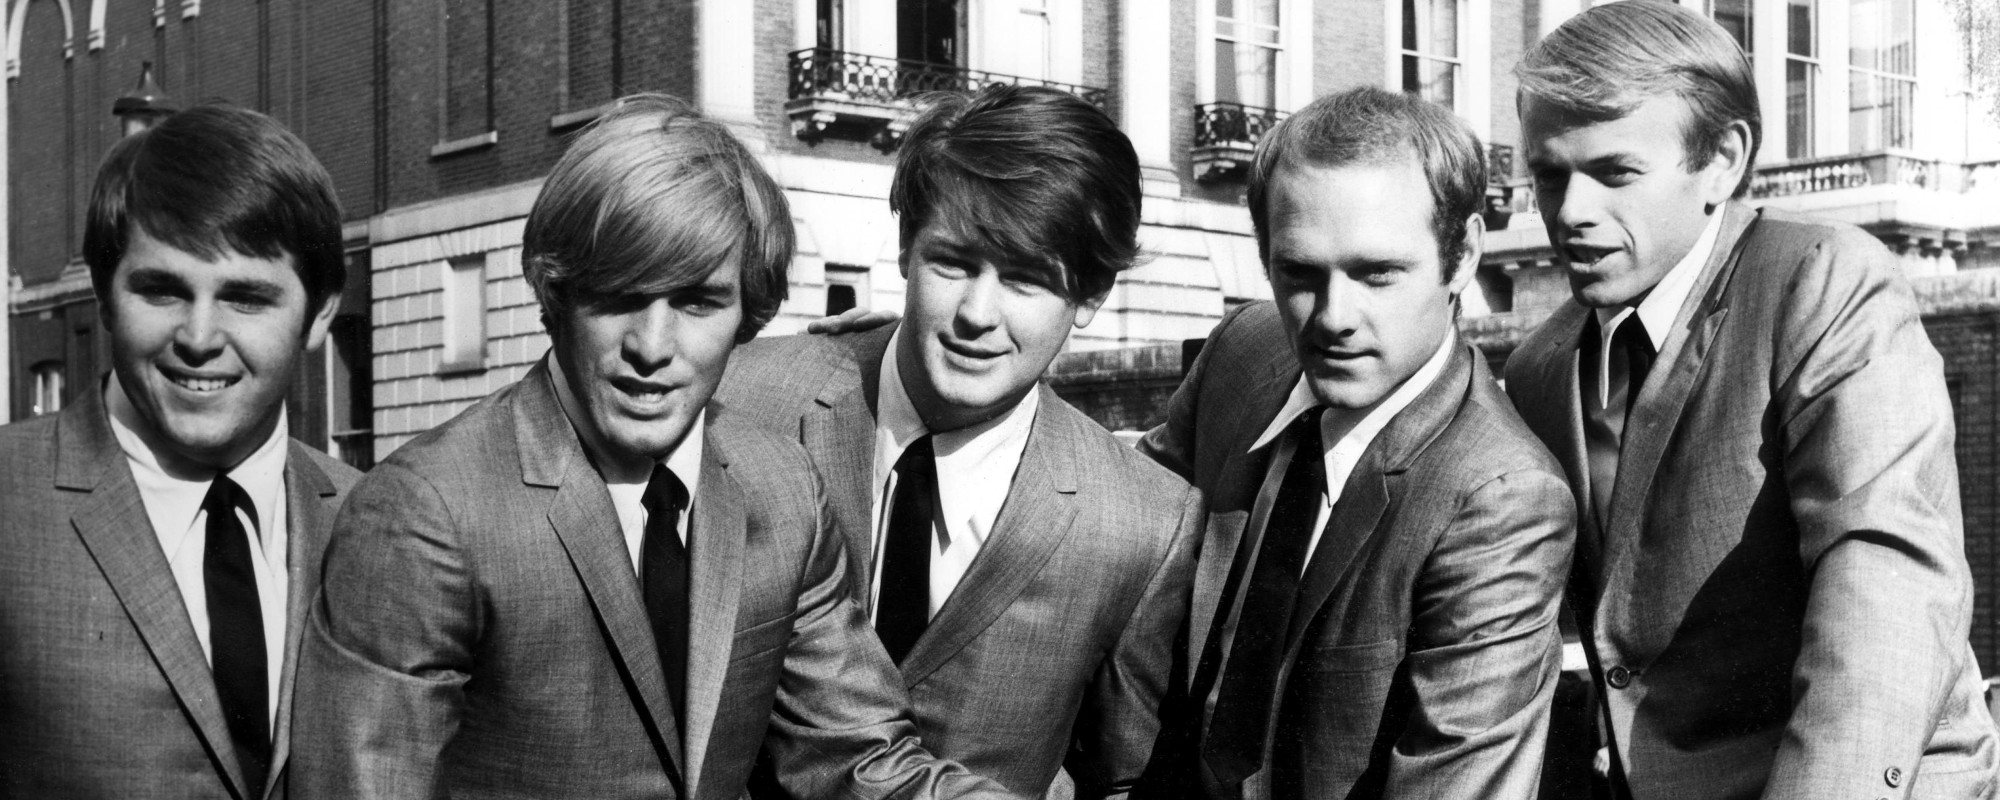 The Conflicting Stories Behind the Origin of “Surfer Girl” by The Beach Boys